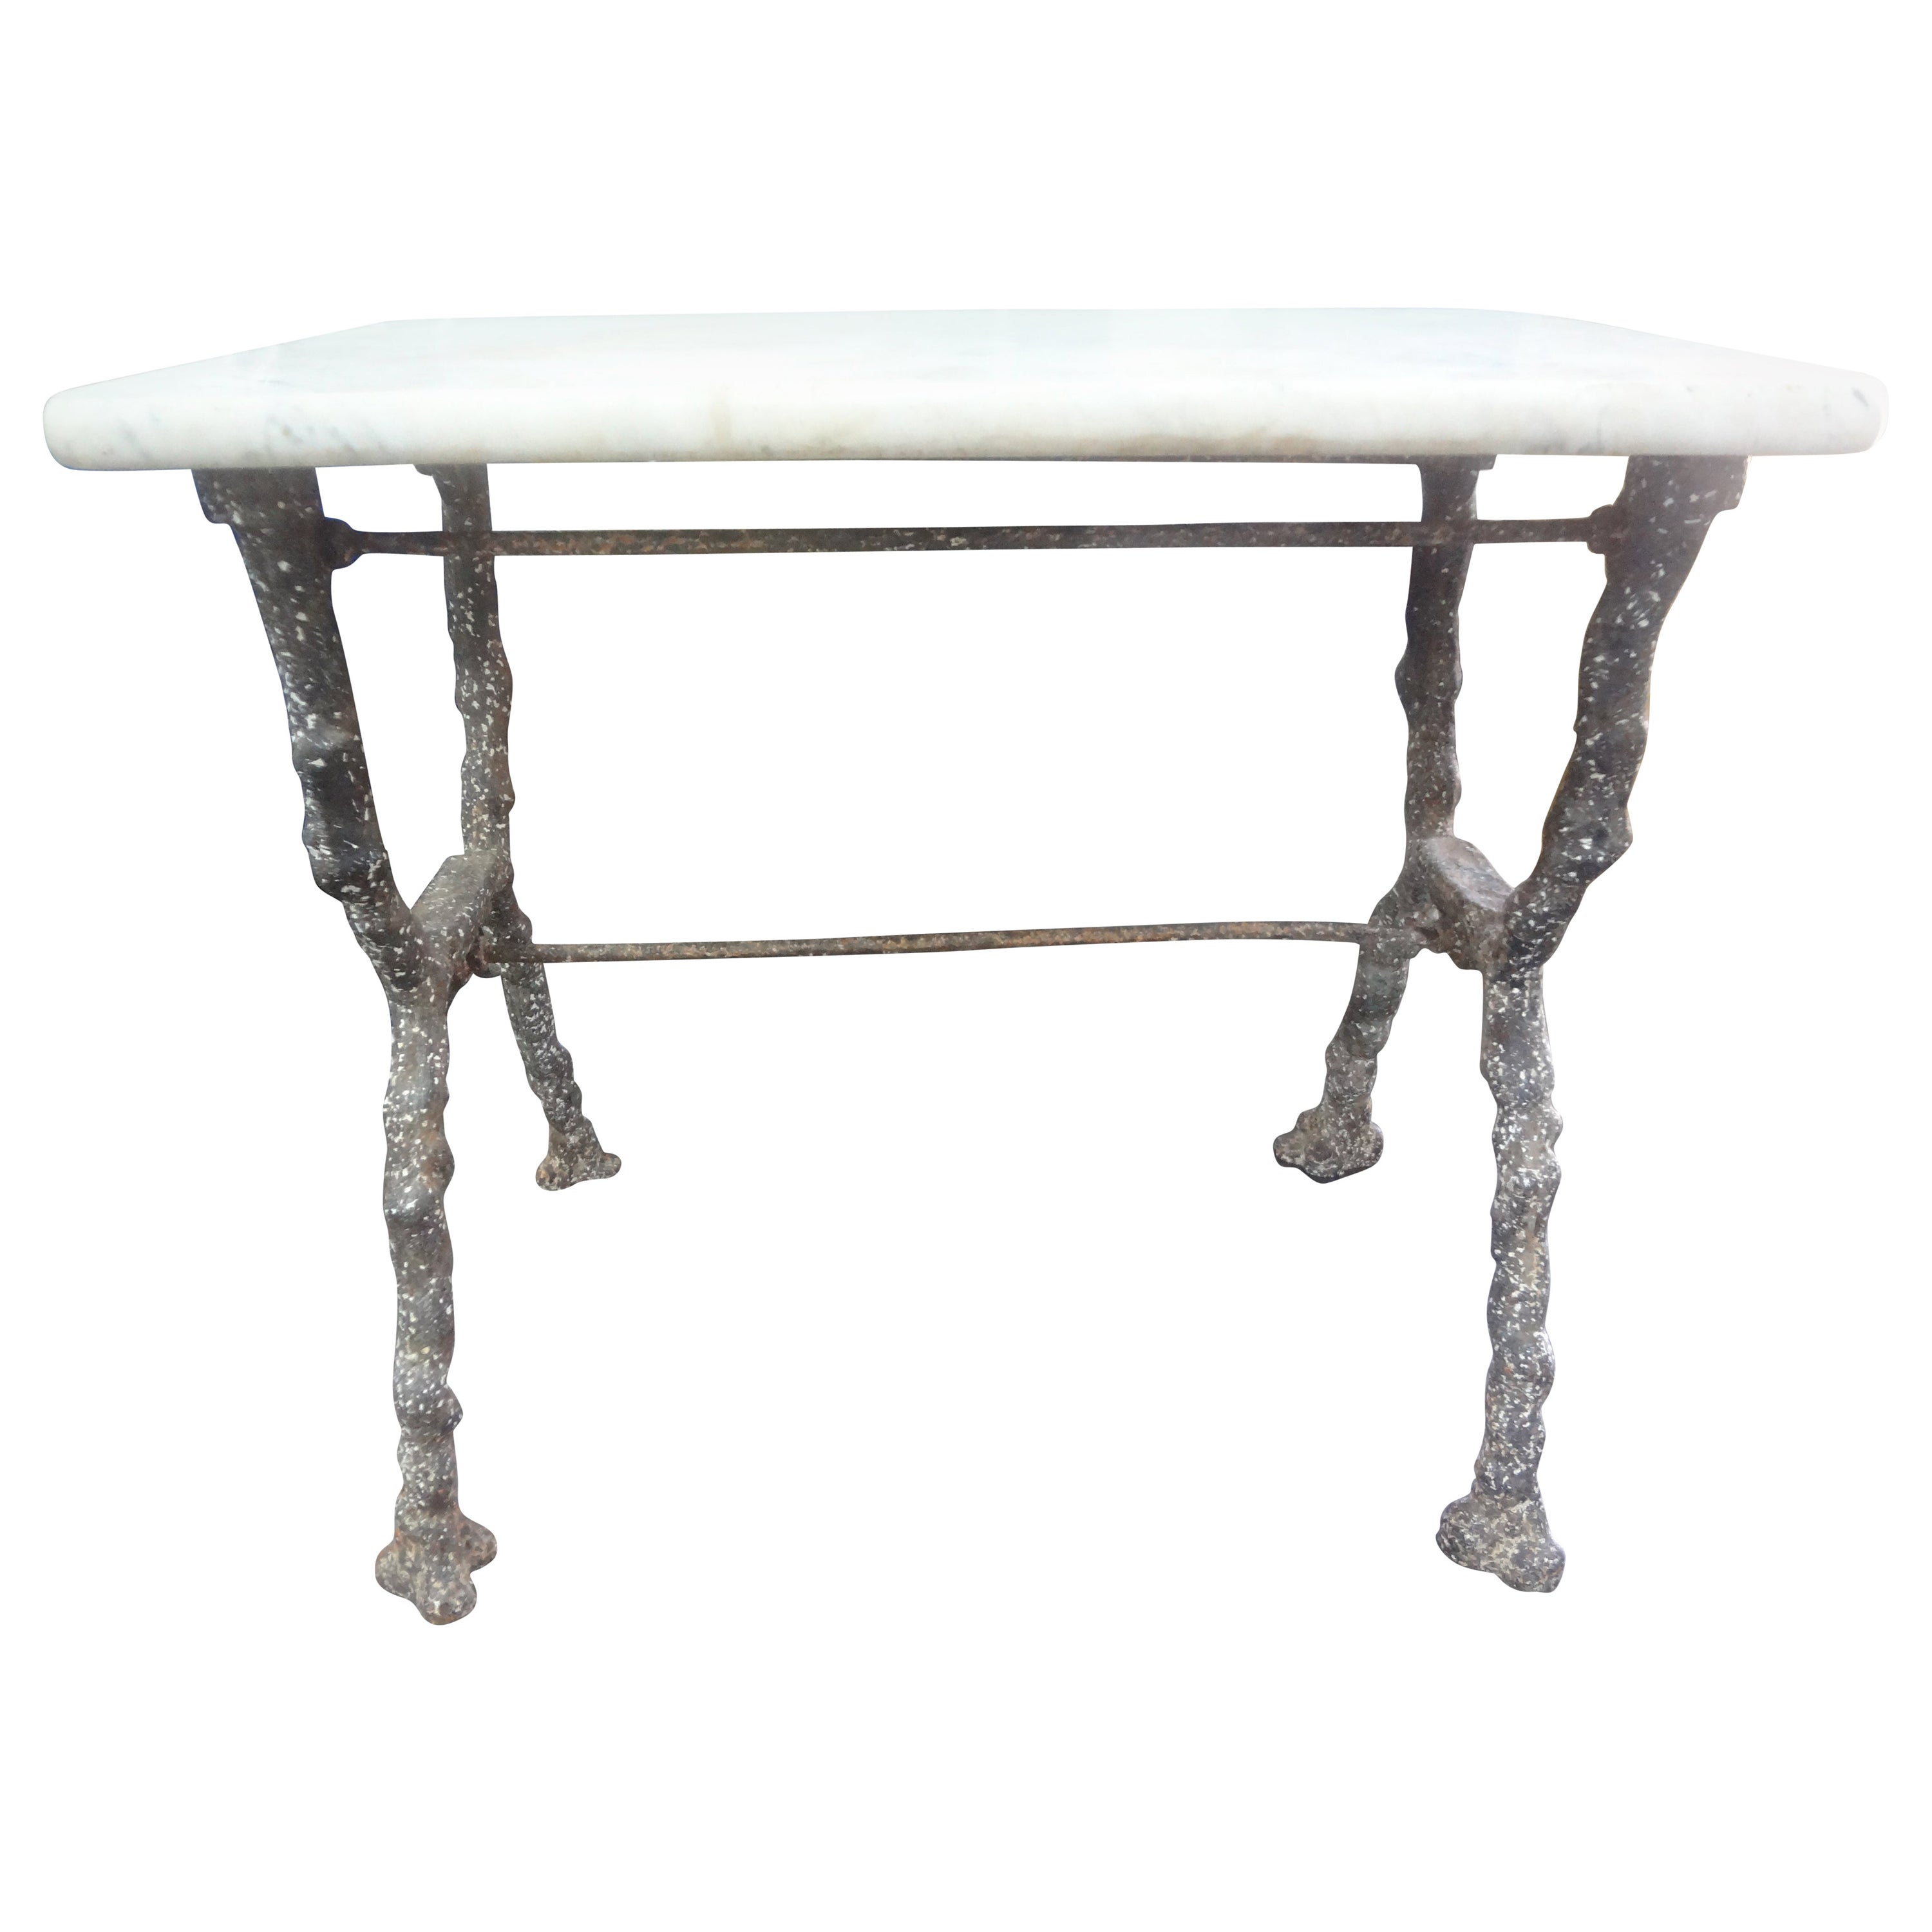 Rare 19th Century French Iron Garden Table With Marble Top By Arras